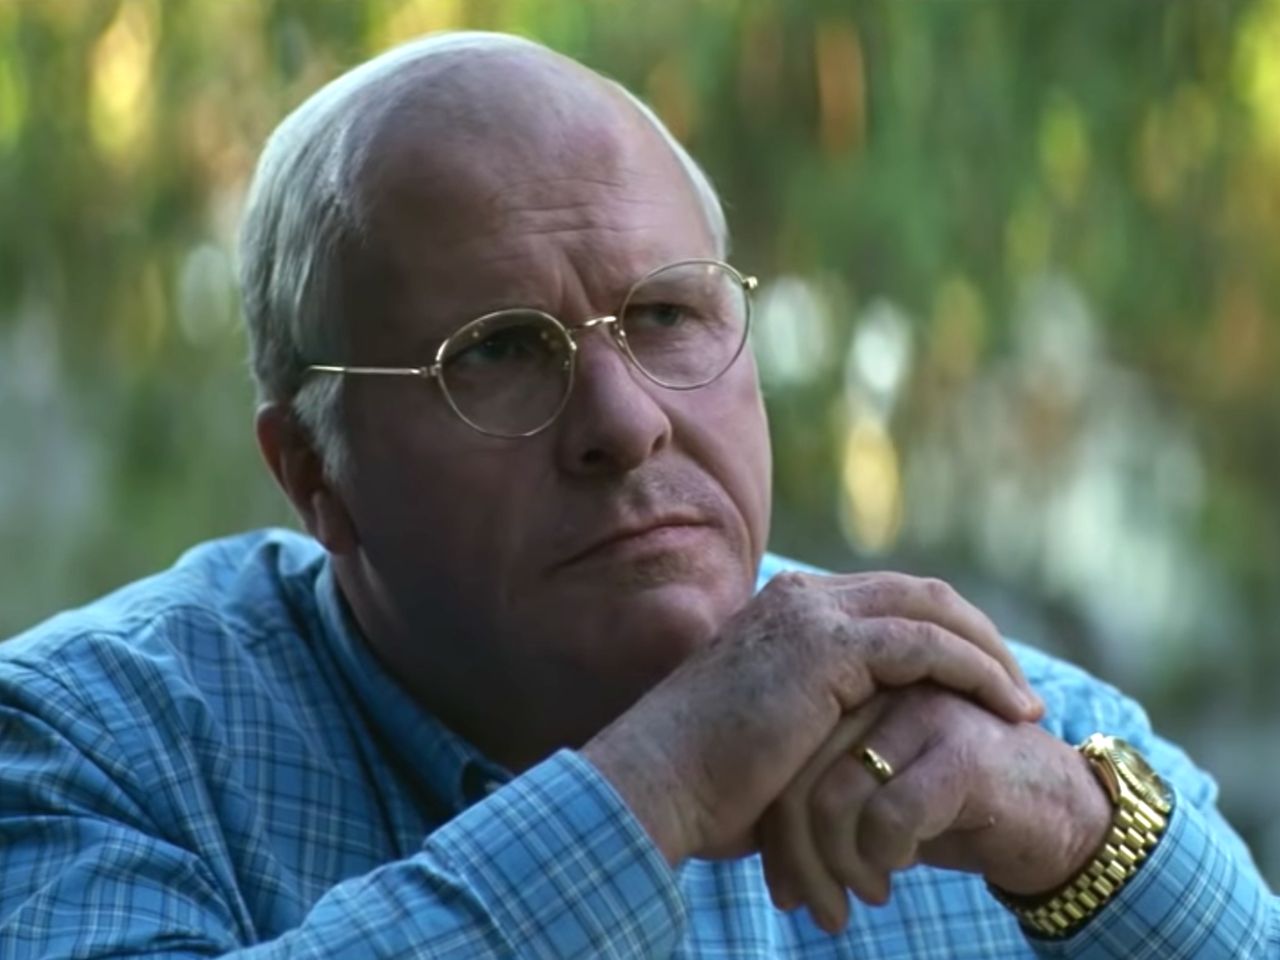 Christian played former U.S. Vice President Dick Cheney in Vice.